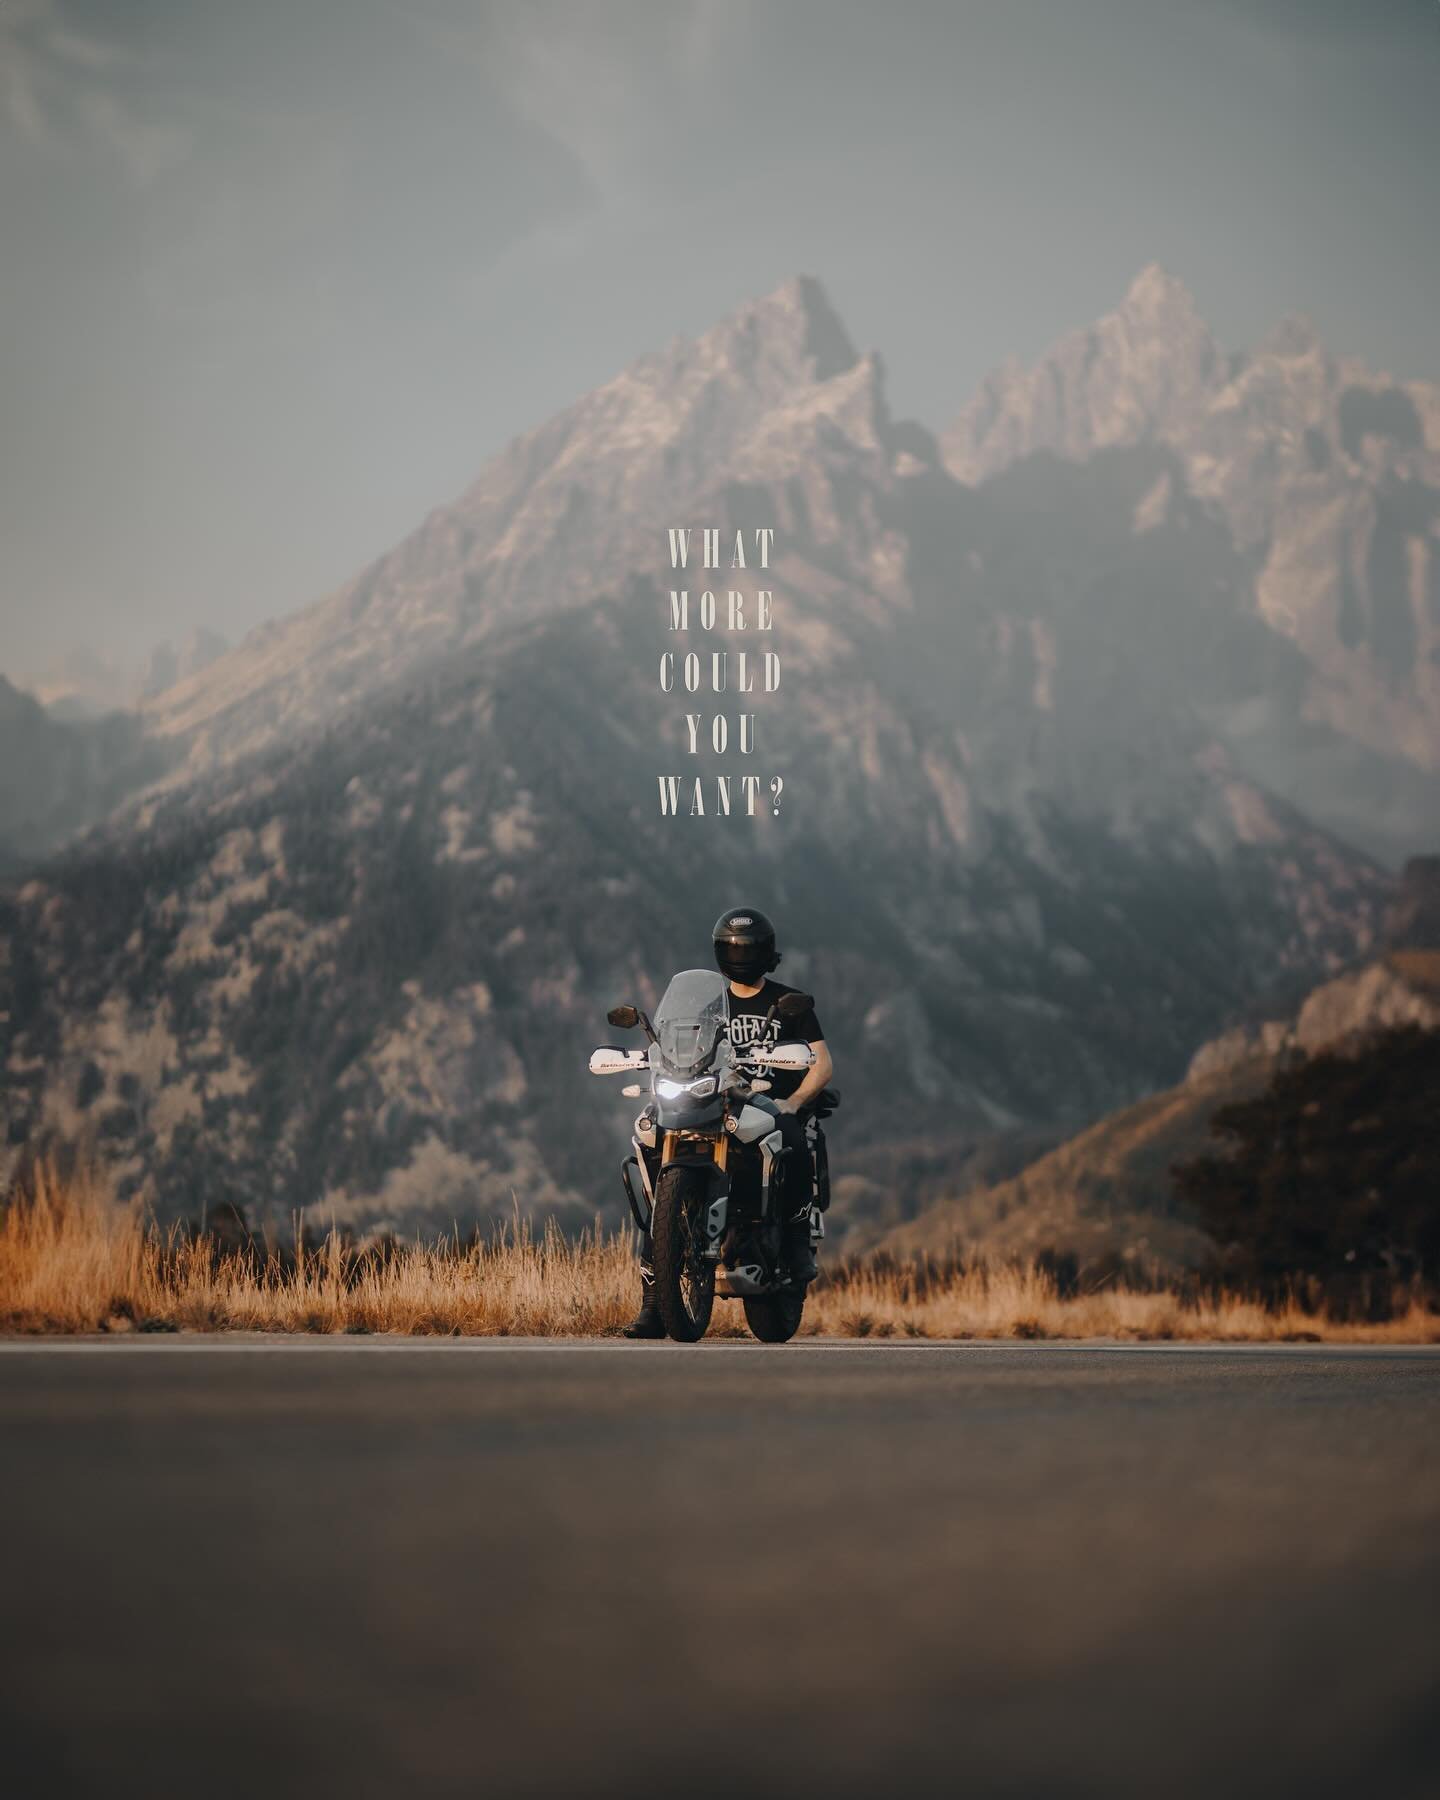 Some days, most days actually, all I wanna do is gather a few friends, pack up our bikes, pick a direction (preferable towards the mountains), and go. Is that really too much to want for?

#enjoythejourney #motorcycleadventure #roadtrip #grandtetons 